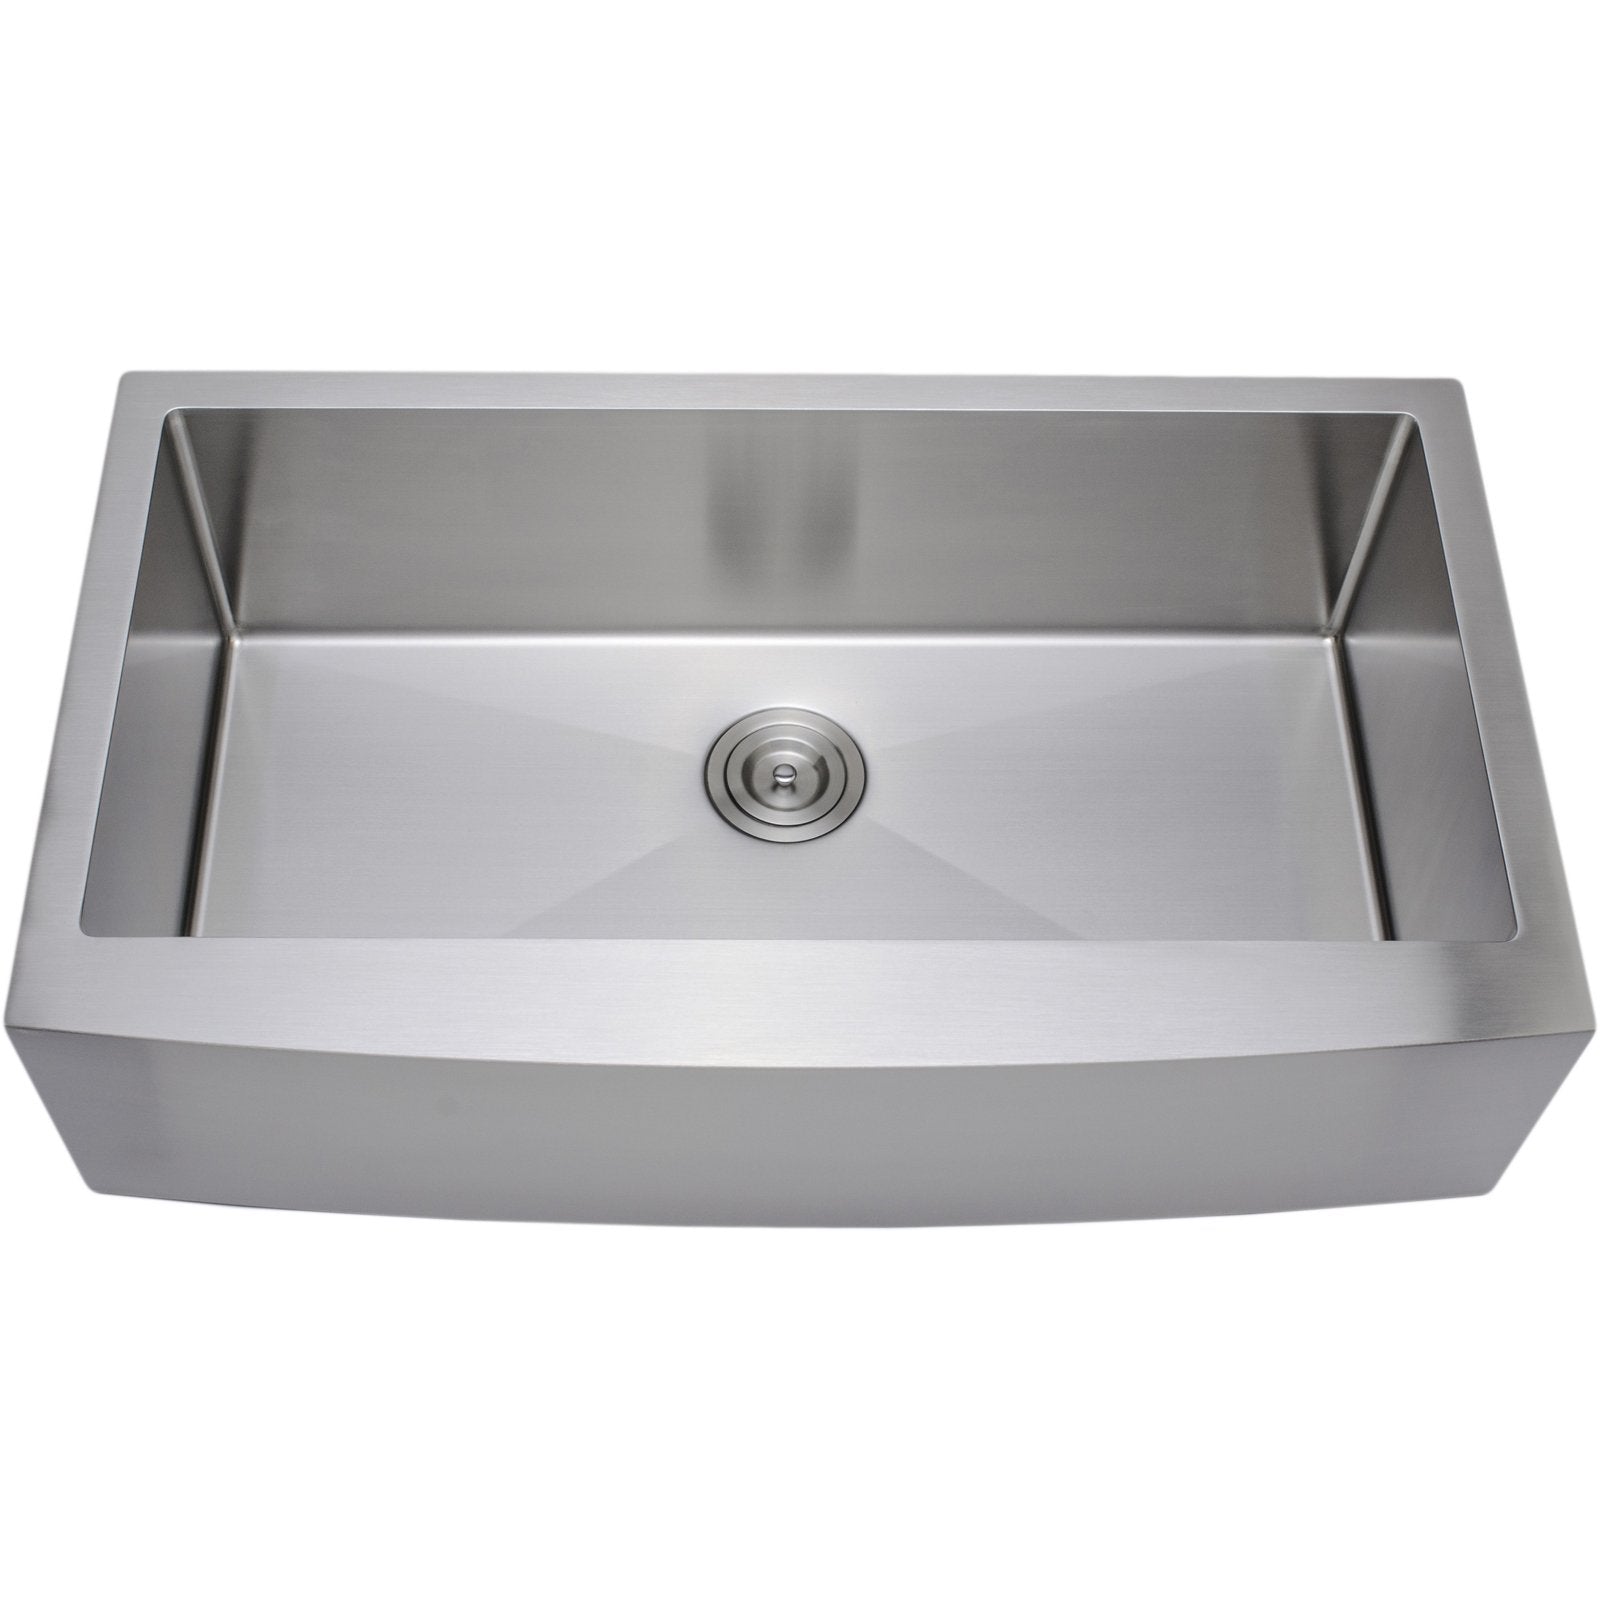 Wells Sinkware Handcrafted 36-Inch 16-Gauge Arched Apron Front Farmhouse Single Bowl Stainless Steel Kitchen Sink-DirectSinks